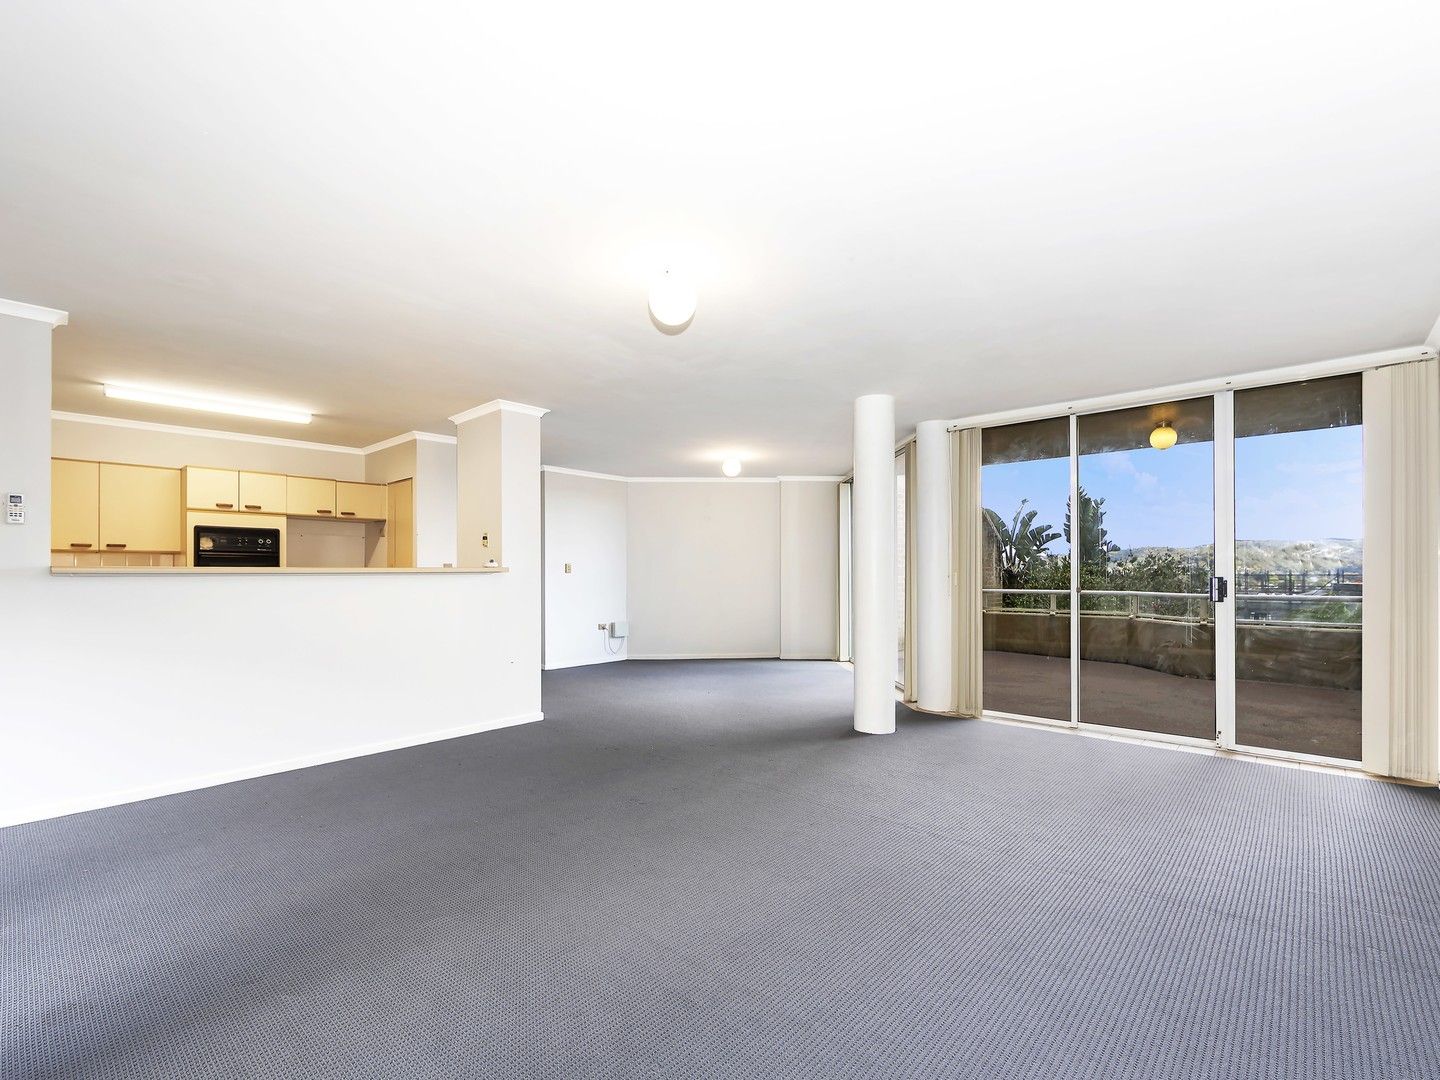 2 bedrooms Apartment / Unit / Flat in 6/91-95 John Whiteway Drive GOSFORD NSW, 2250